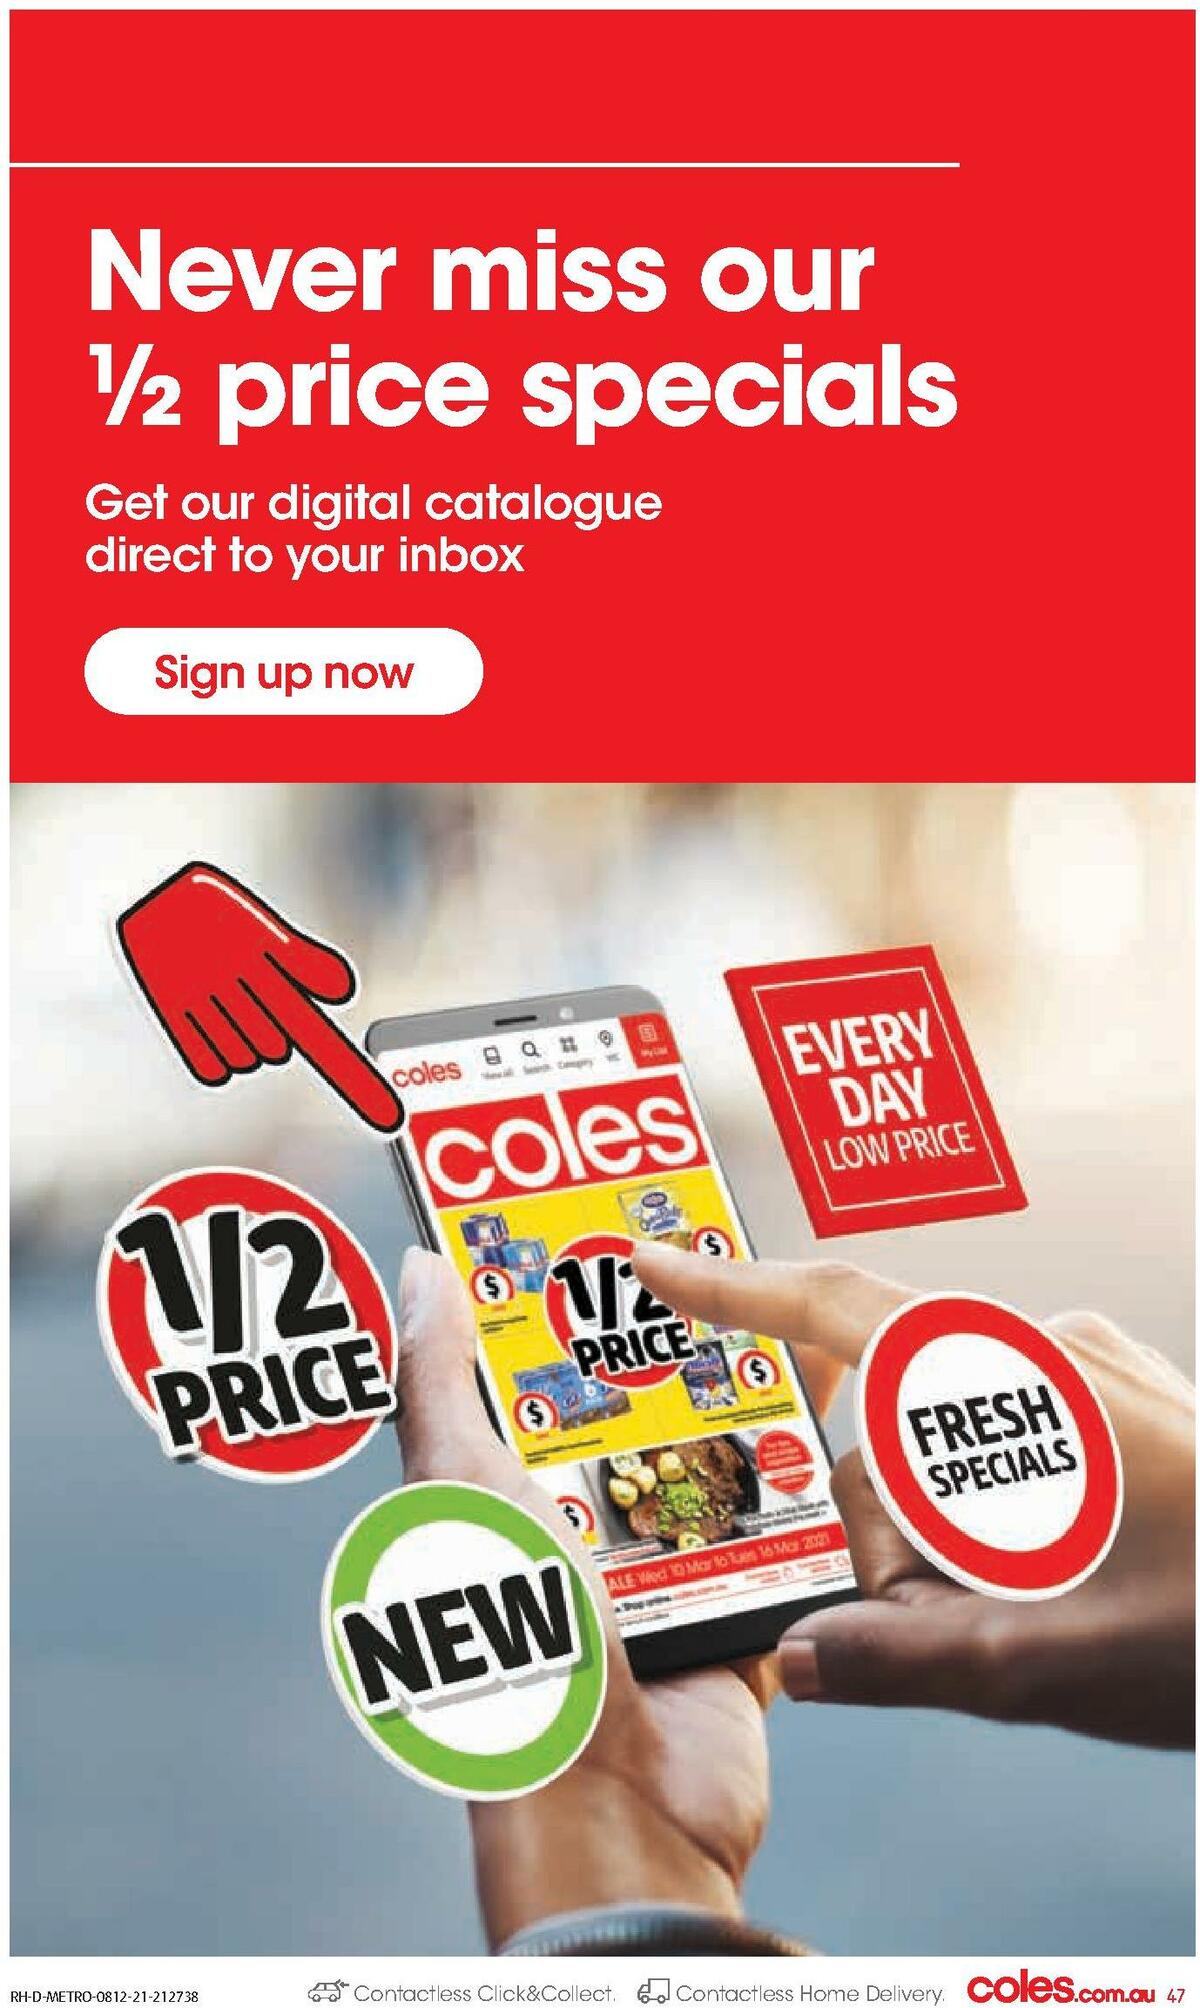 Coles Catalogues from 8 December